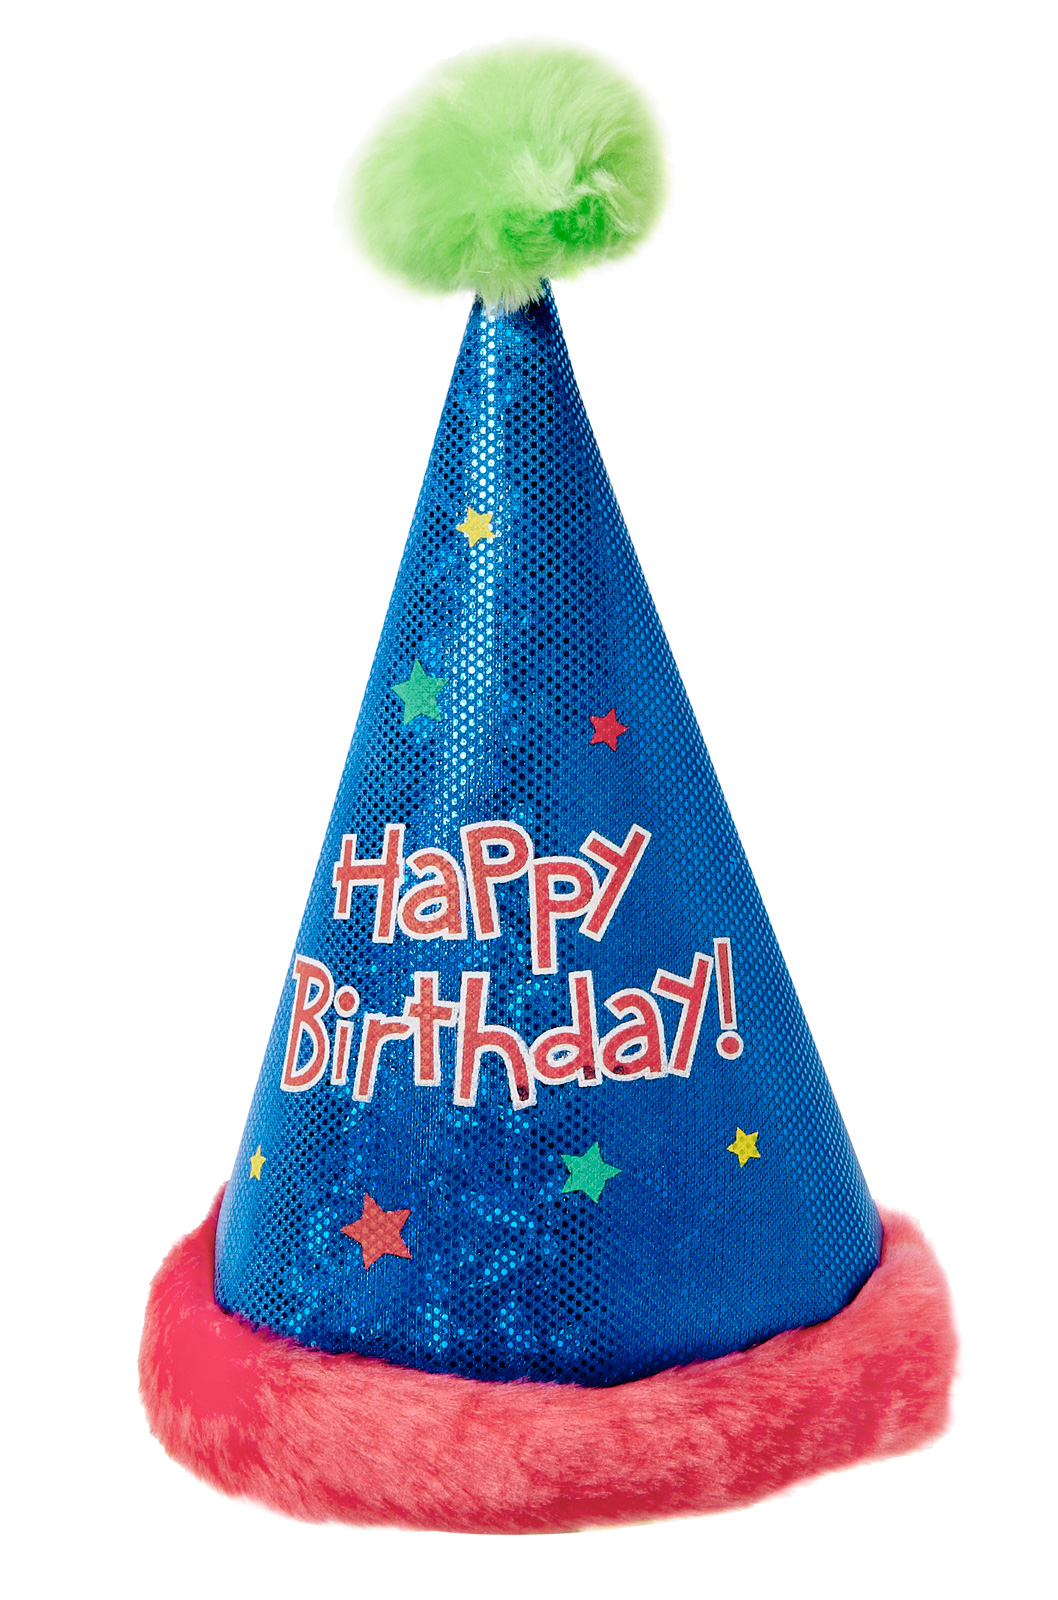 Birthday Hat Picture - Clipart library